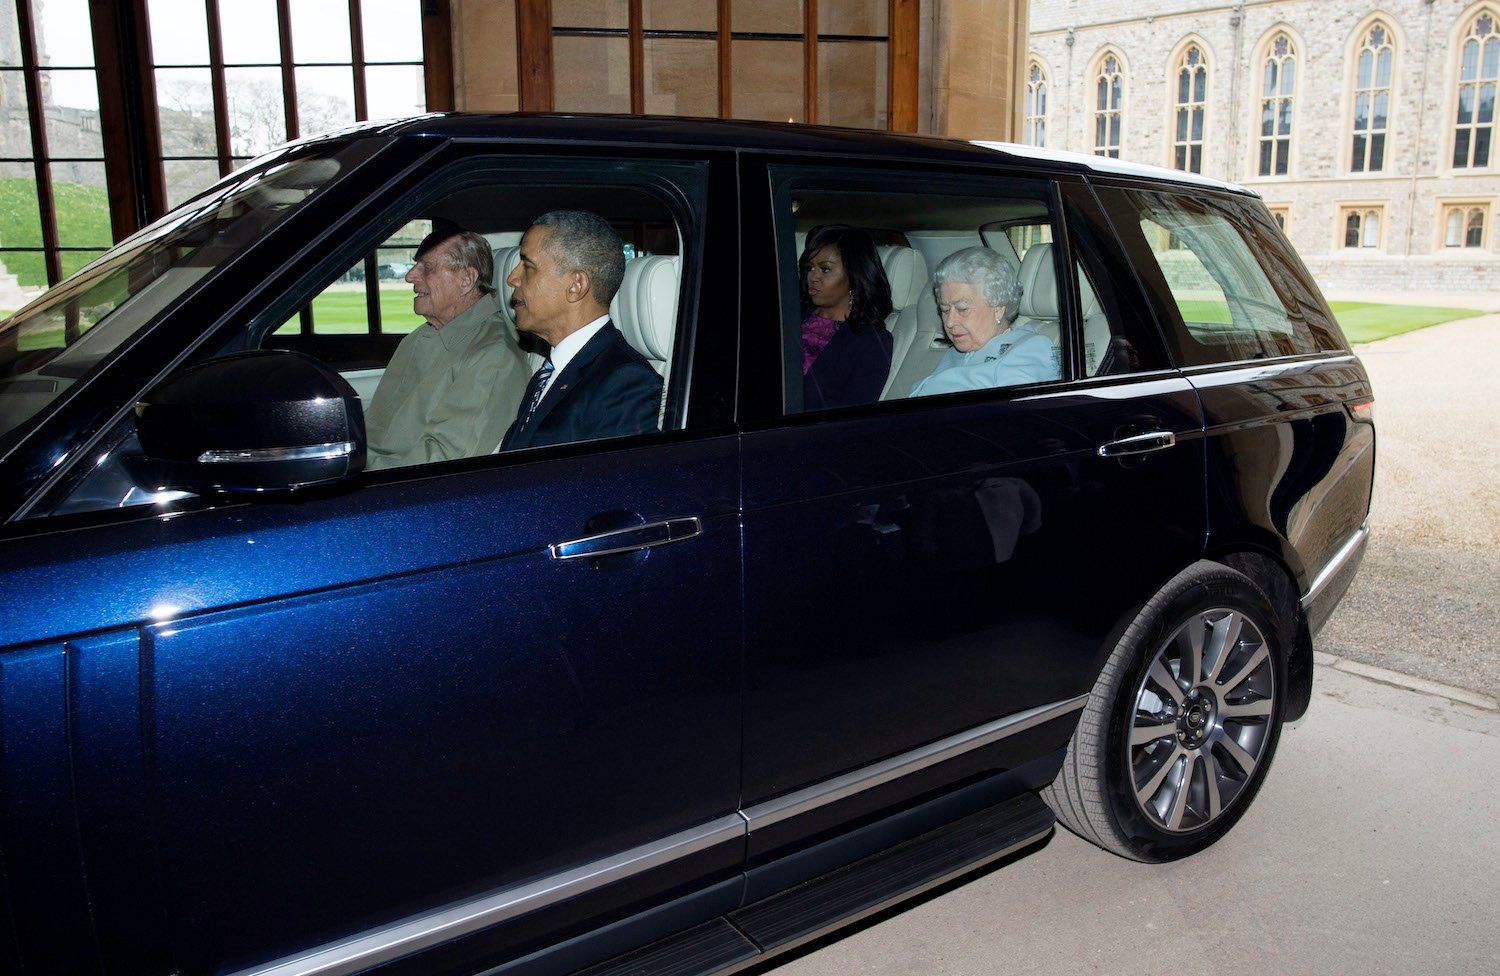 Prince Philip and Barack Obama ride in the front seat of a Range Rover while Queen Elizabeth II and Michelle Obama ride in the back seat